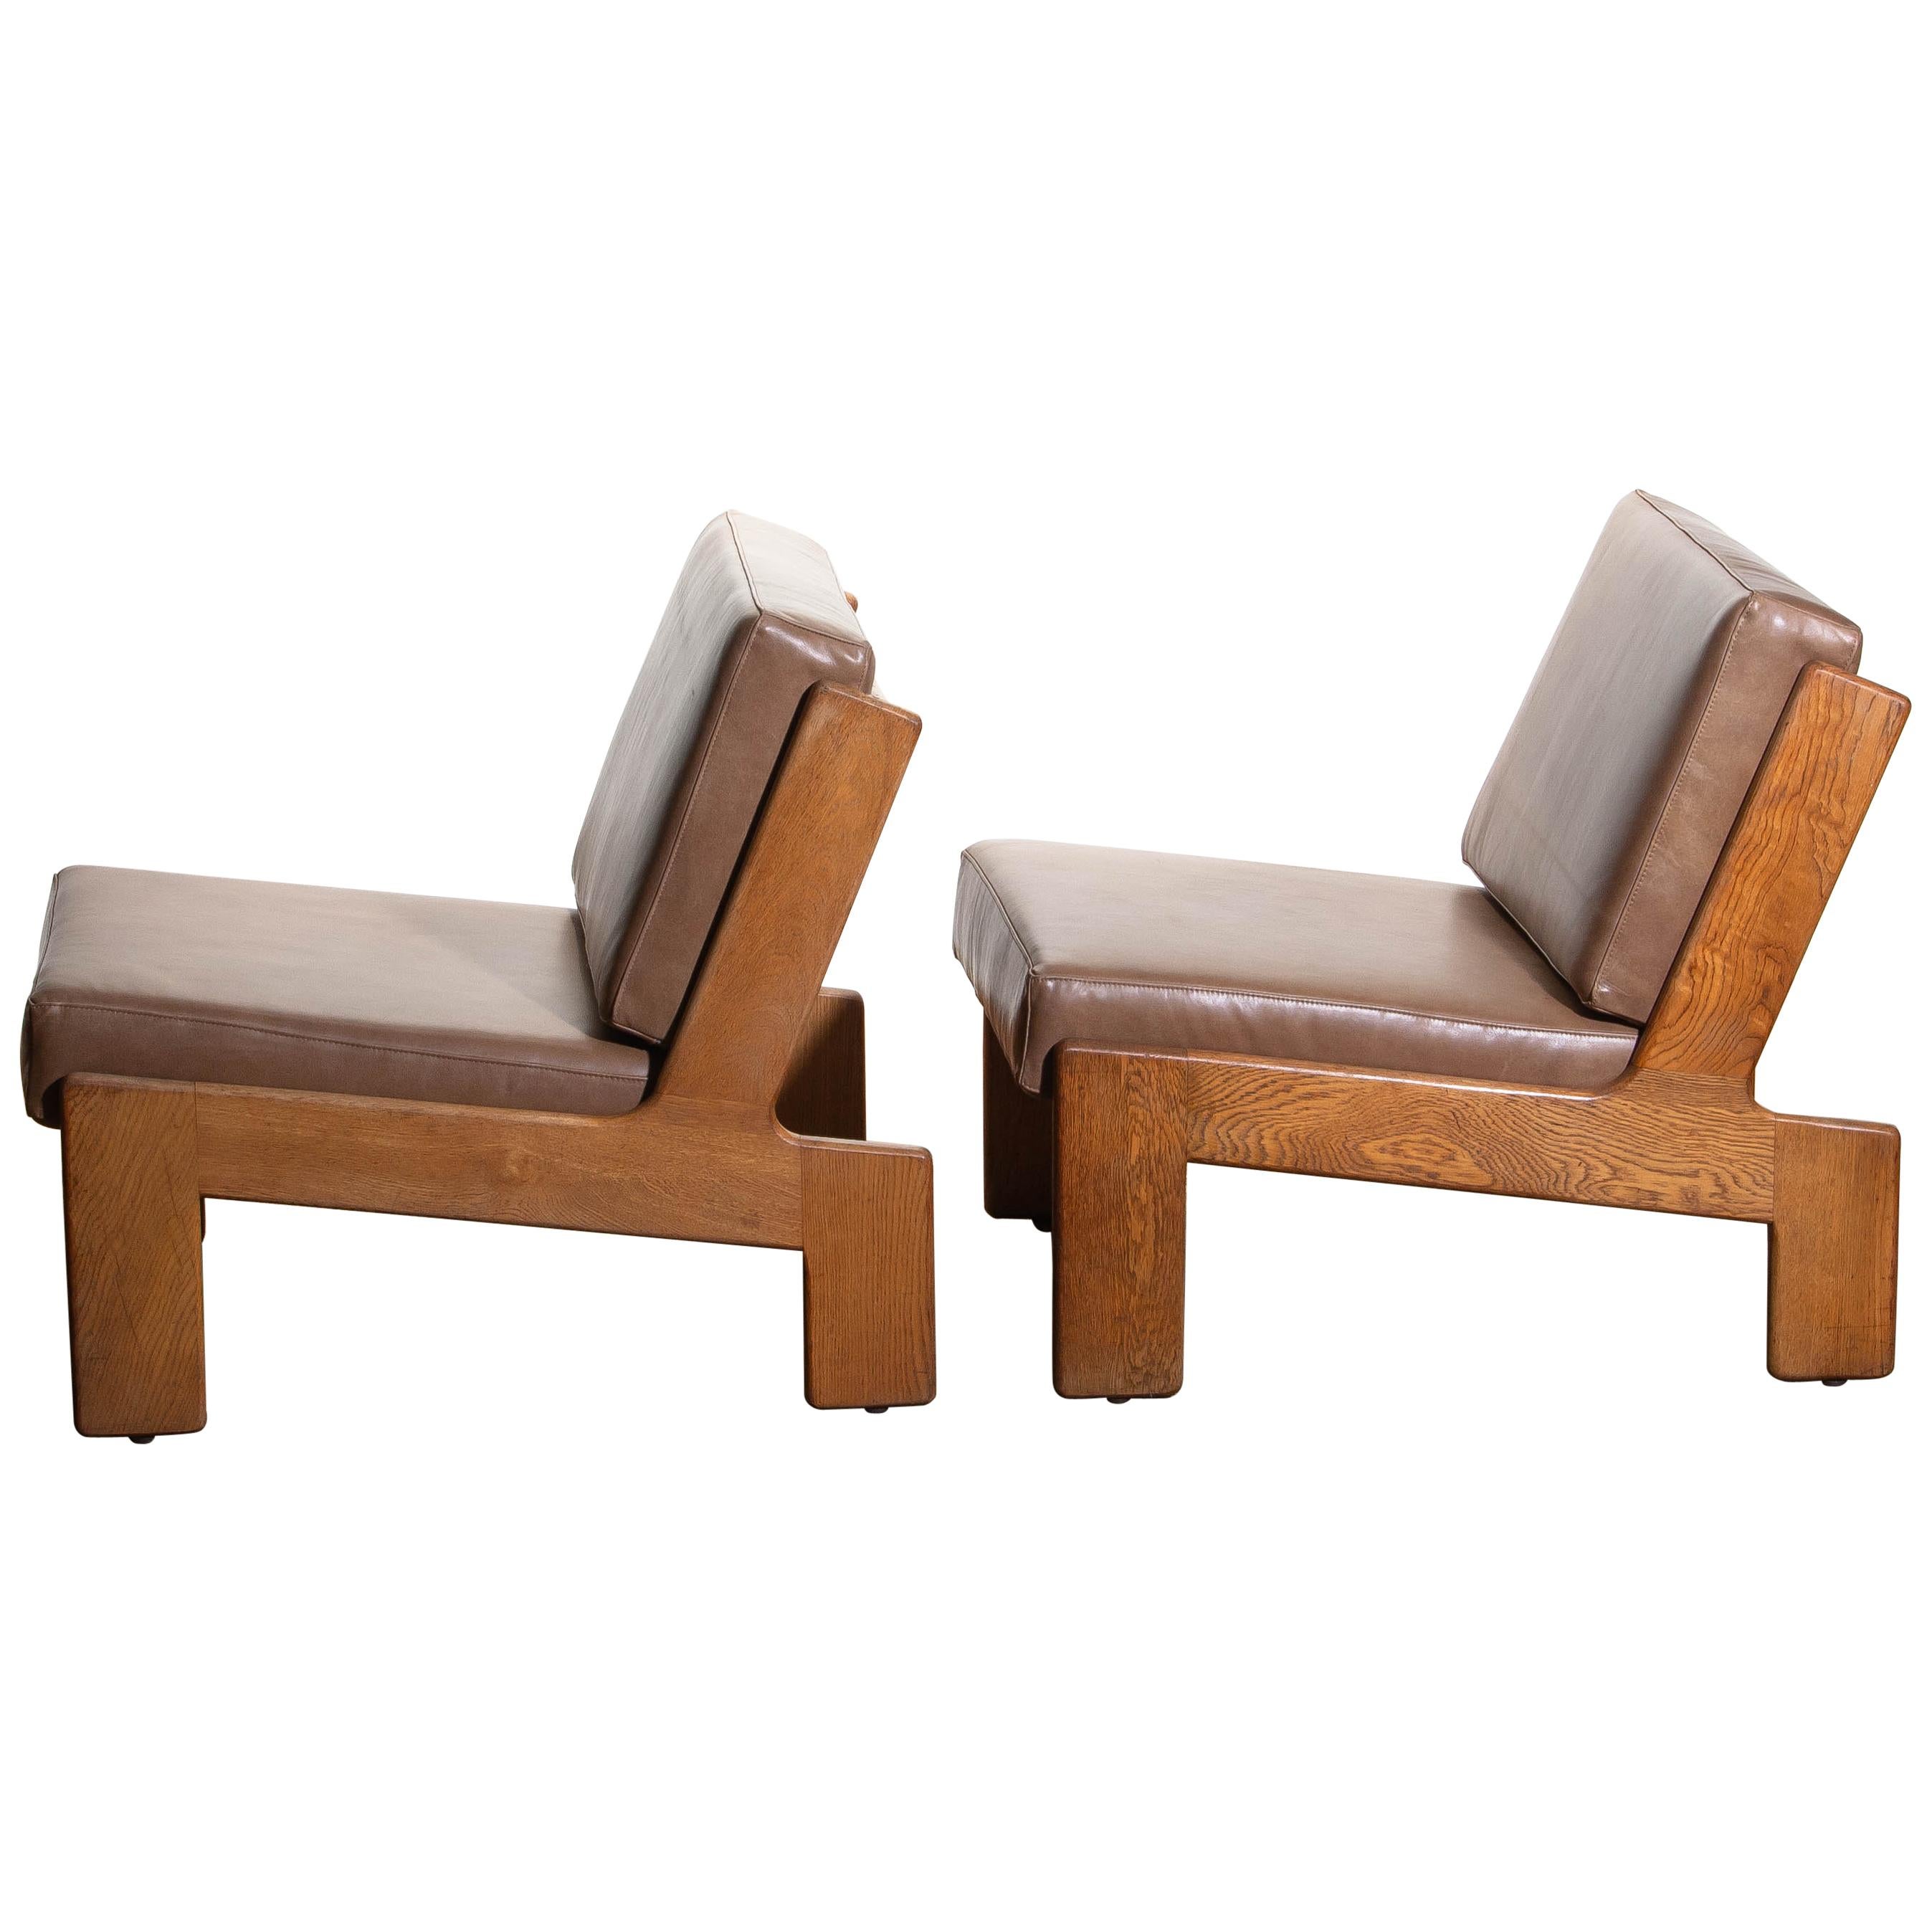 1960s set of two extremely rare cubist lounge /easy chairs designed by Esko Pajamies for Asko Finland in oak and leather.
The cushions of both chairs are newly upholstered with leather. Also the bindings are replaced.
The overall condition of this